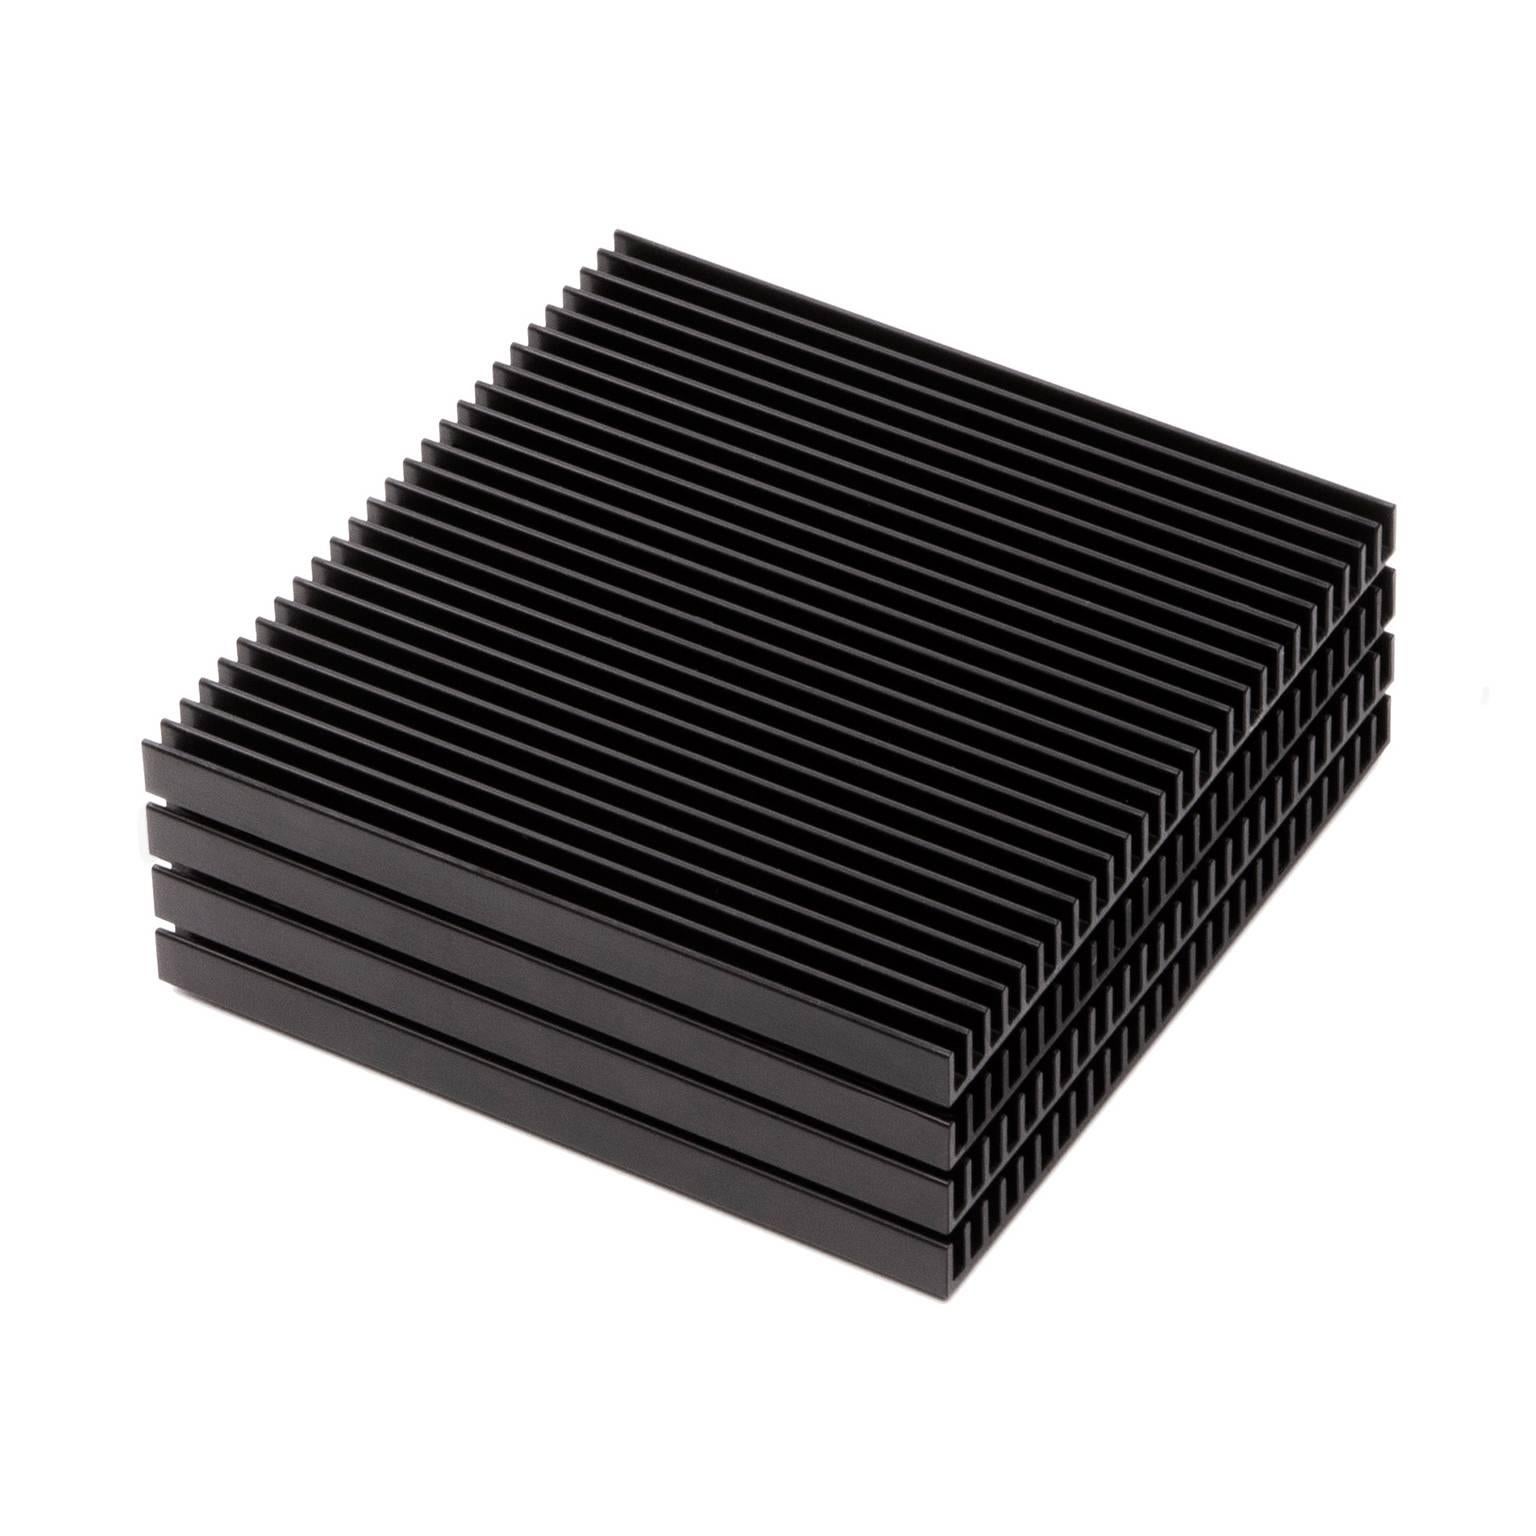 Price includes 4 sets of 4 Coasters (16 total). Slim, architectural, and refined, the Fin Coasters are a decidedly modern approach to a traditional tabletop accessory. Designed by Shaun Kasperbauer, the coasters are produced through a unique